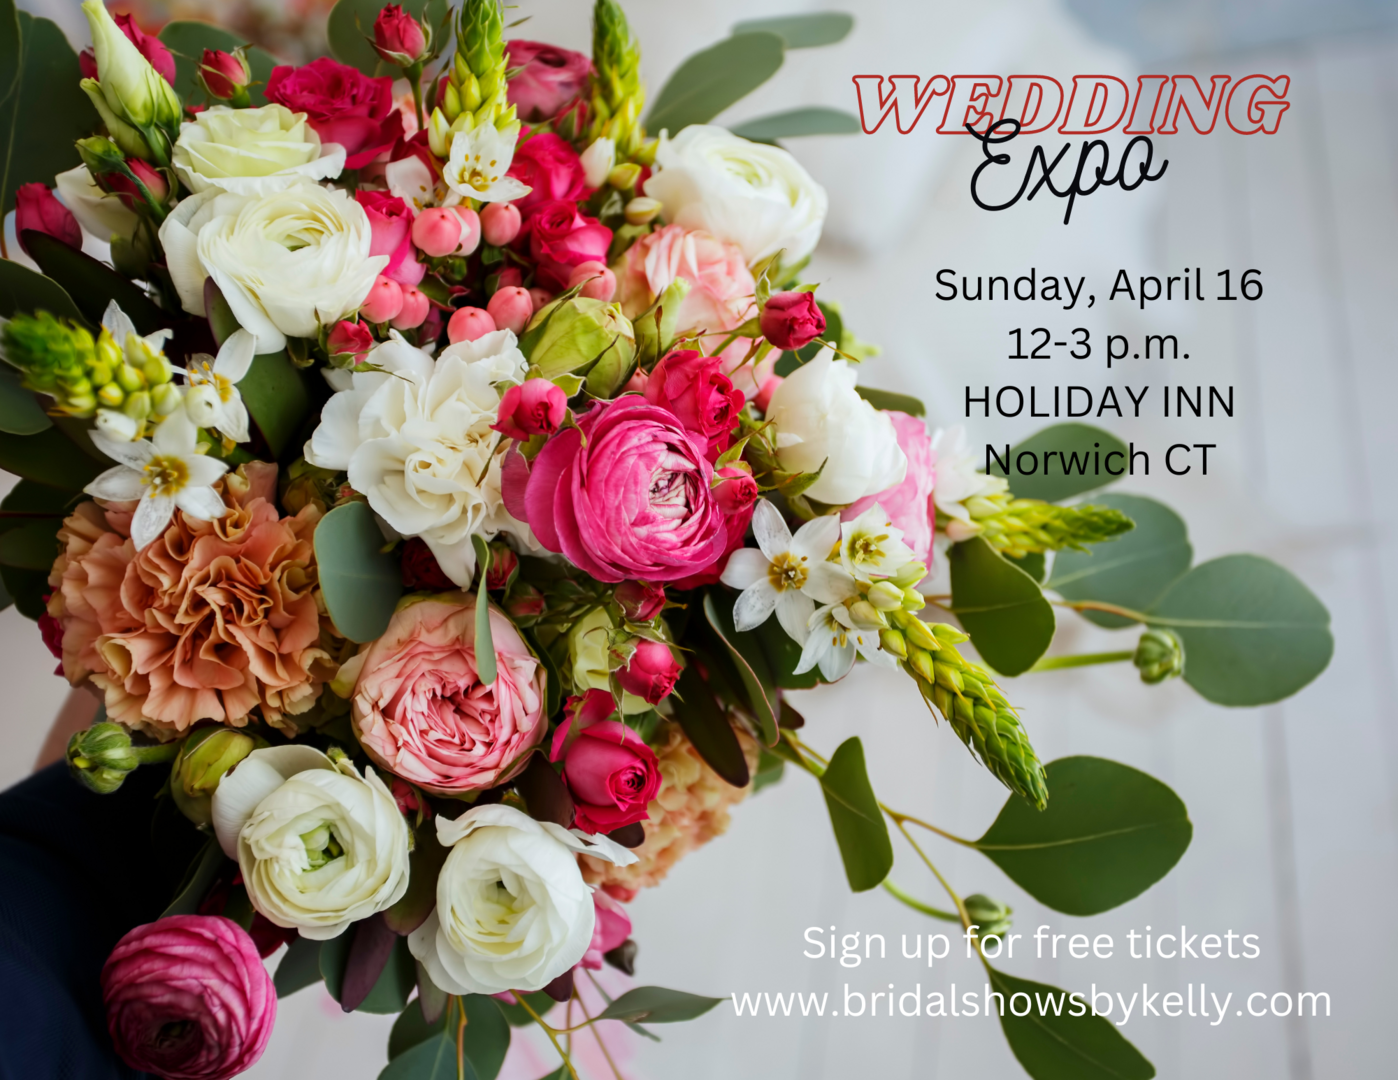 Connecticut Wedding Expo, Norwich, Connecticut, United States